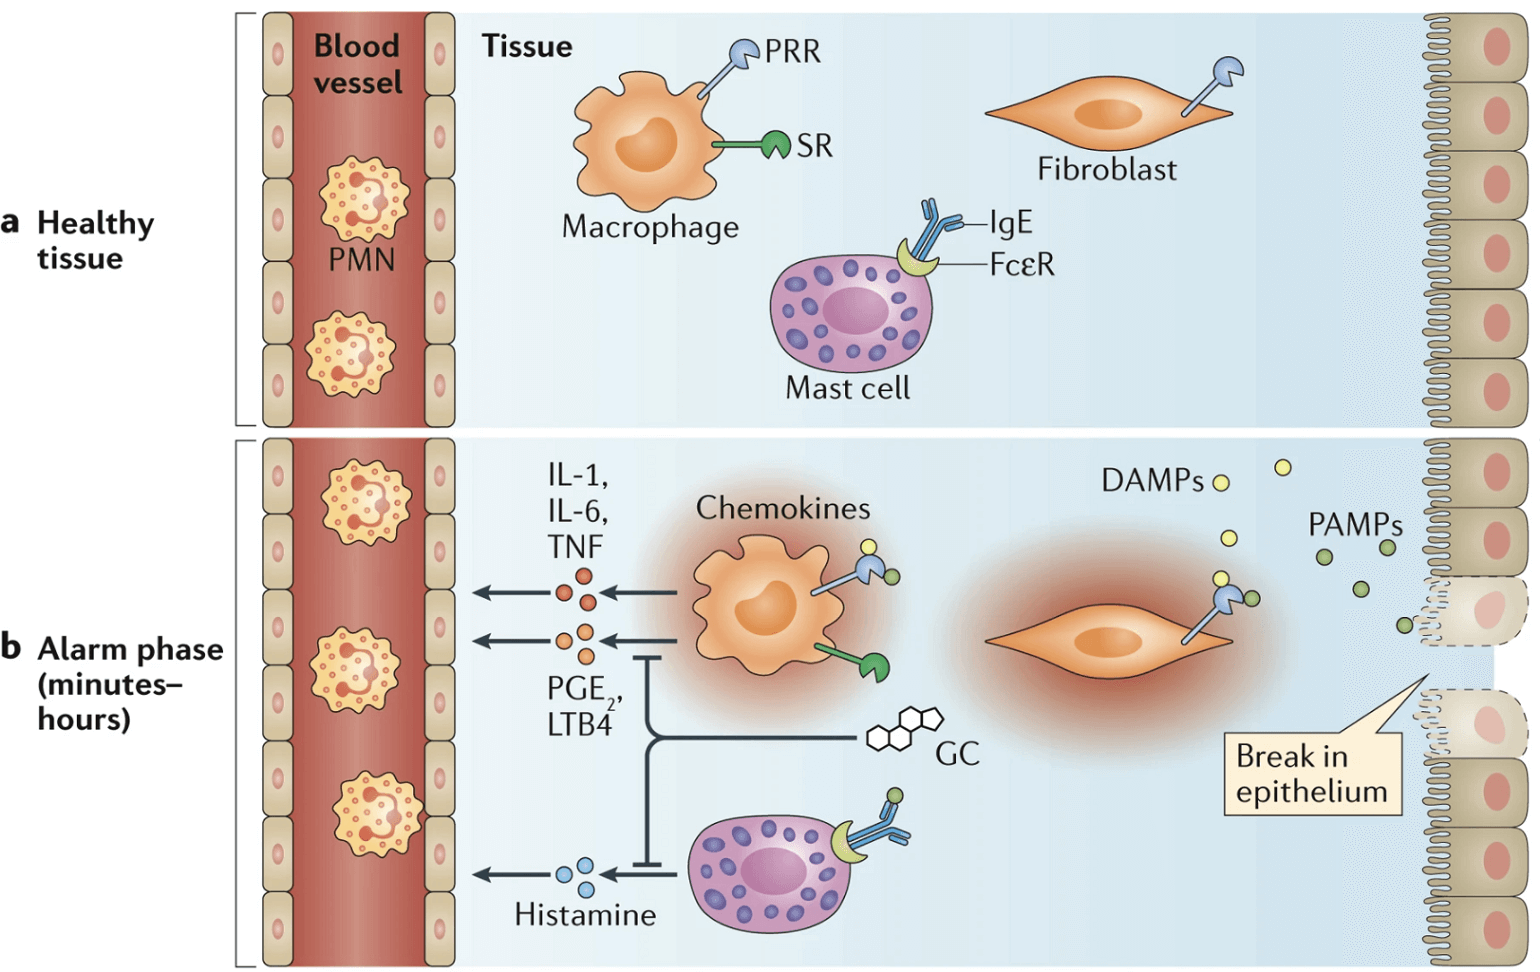 Figure 3. Glucocorticoids decrease expression of pro-inflammatory cytokines. From (Cain and Cidlowski 2017)